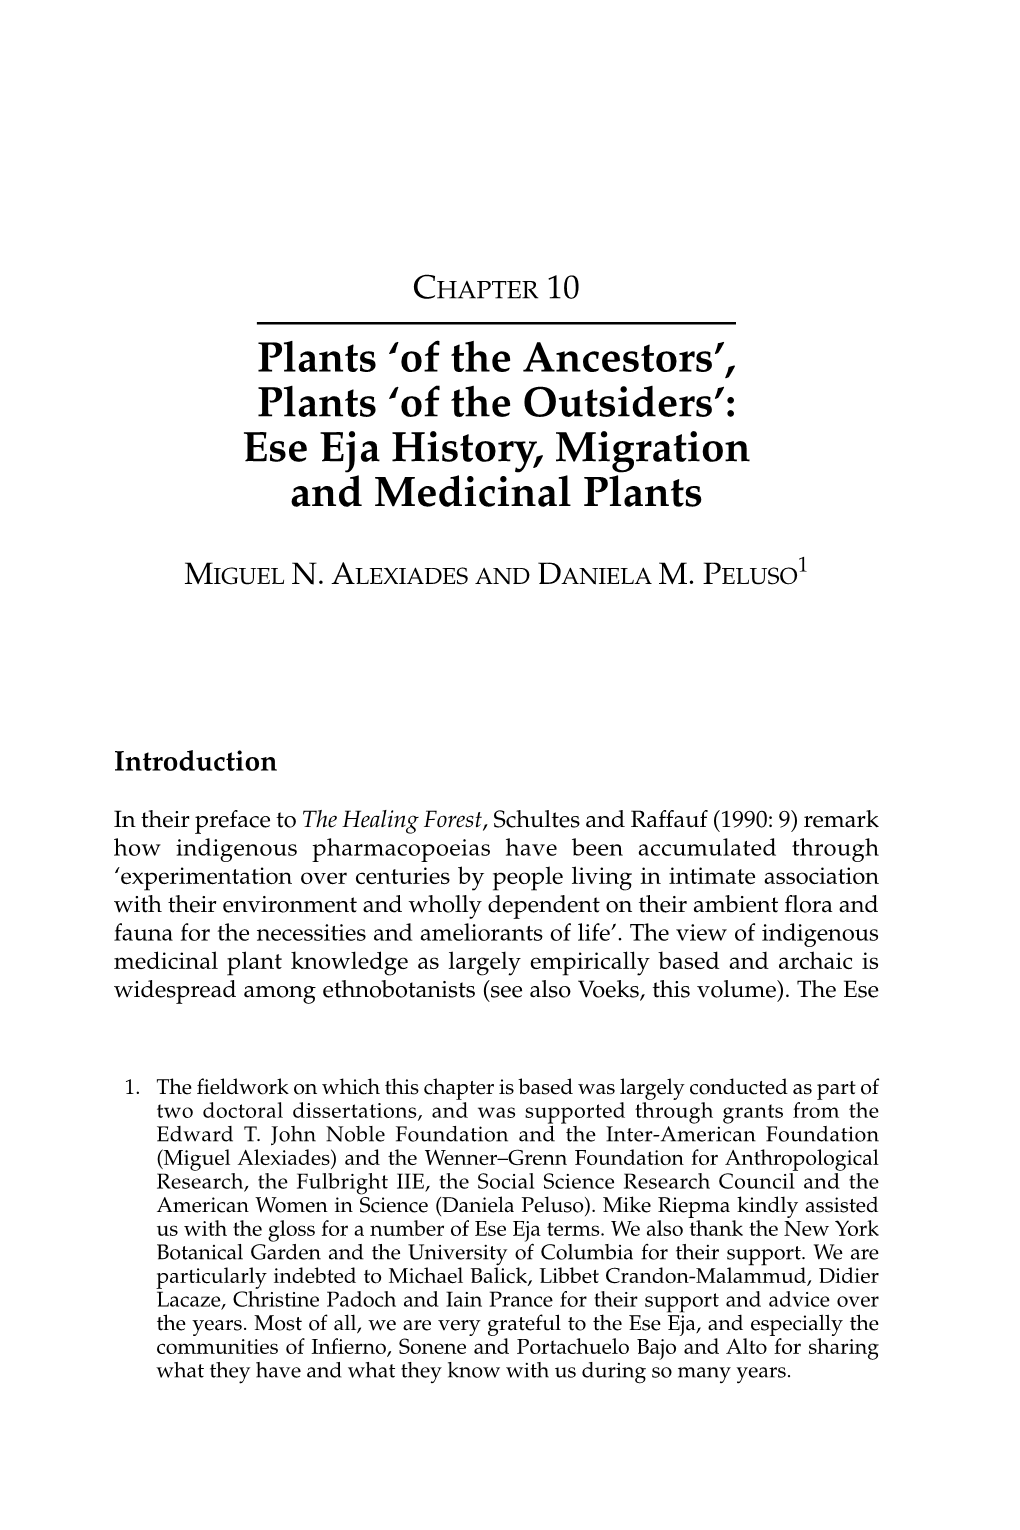 'Of the Outsiders': Ese Eja History, Migration and Medicinal Plants